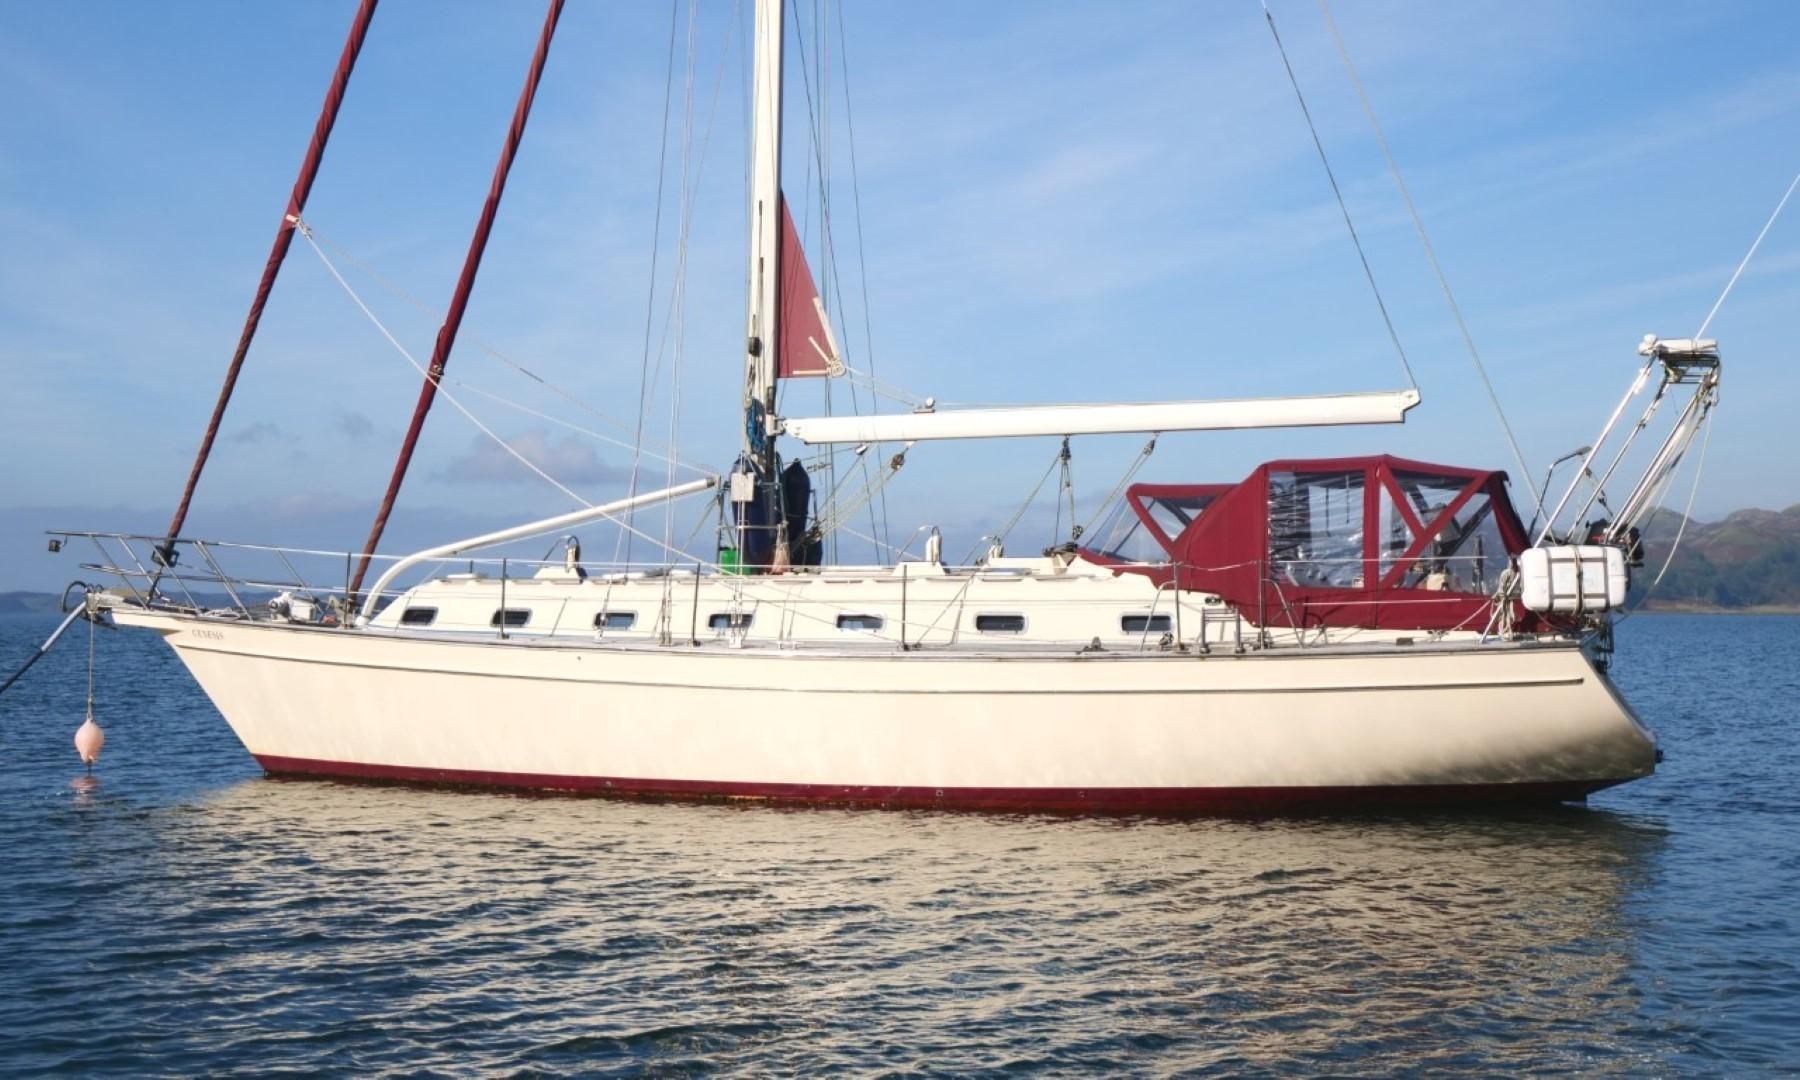 used 420 sailboats for sale